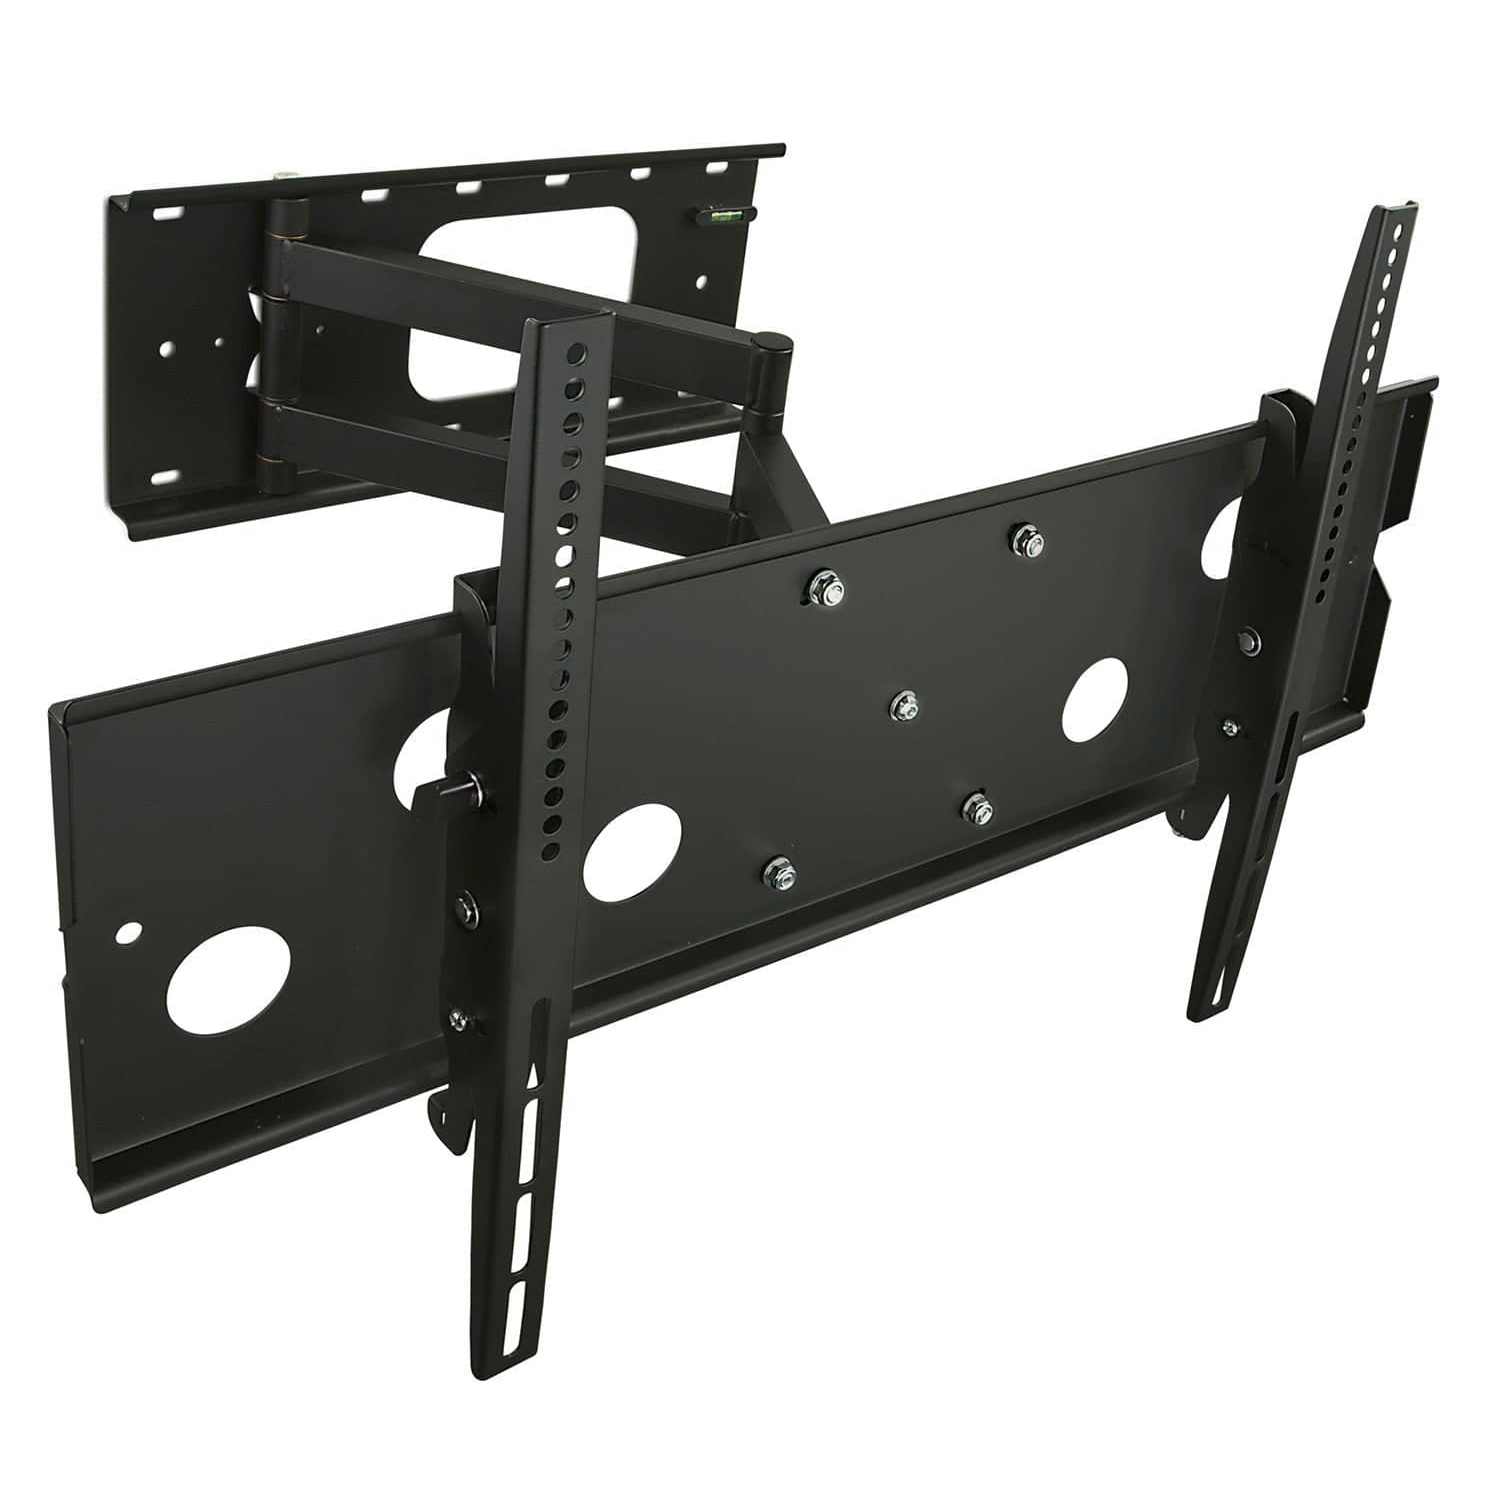 Mount-it! Full Motion TV Wall Mount with Long Extension (MI-319L), Long Arm Extends Up to 26", Fits 42" to 70" TVs